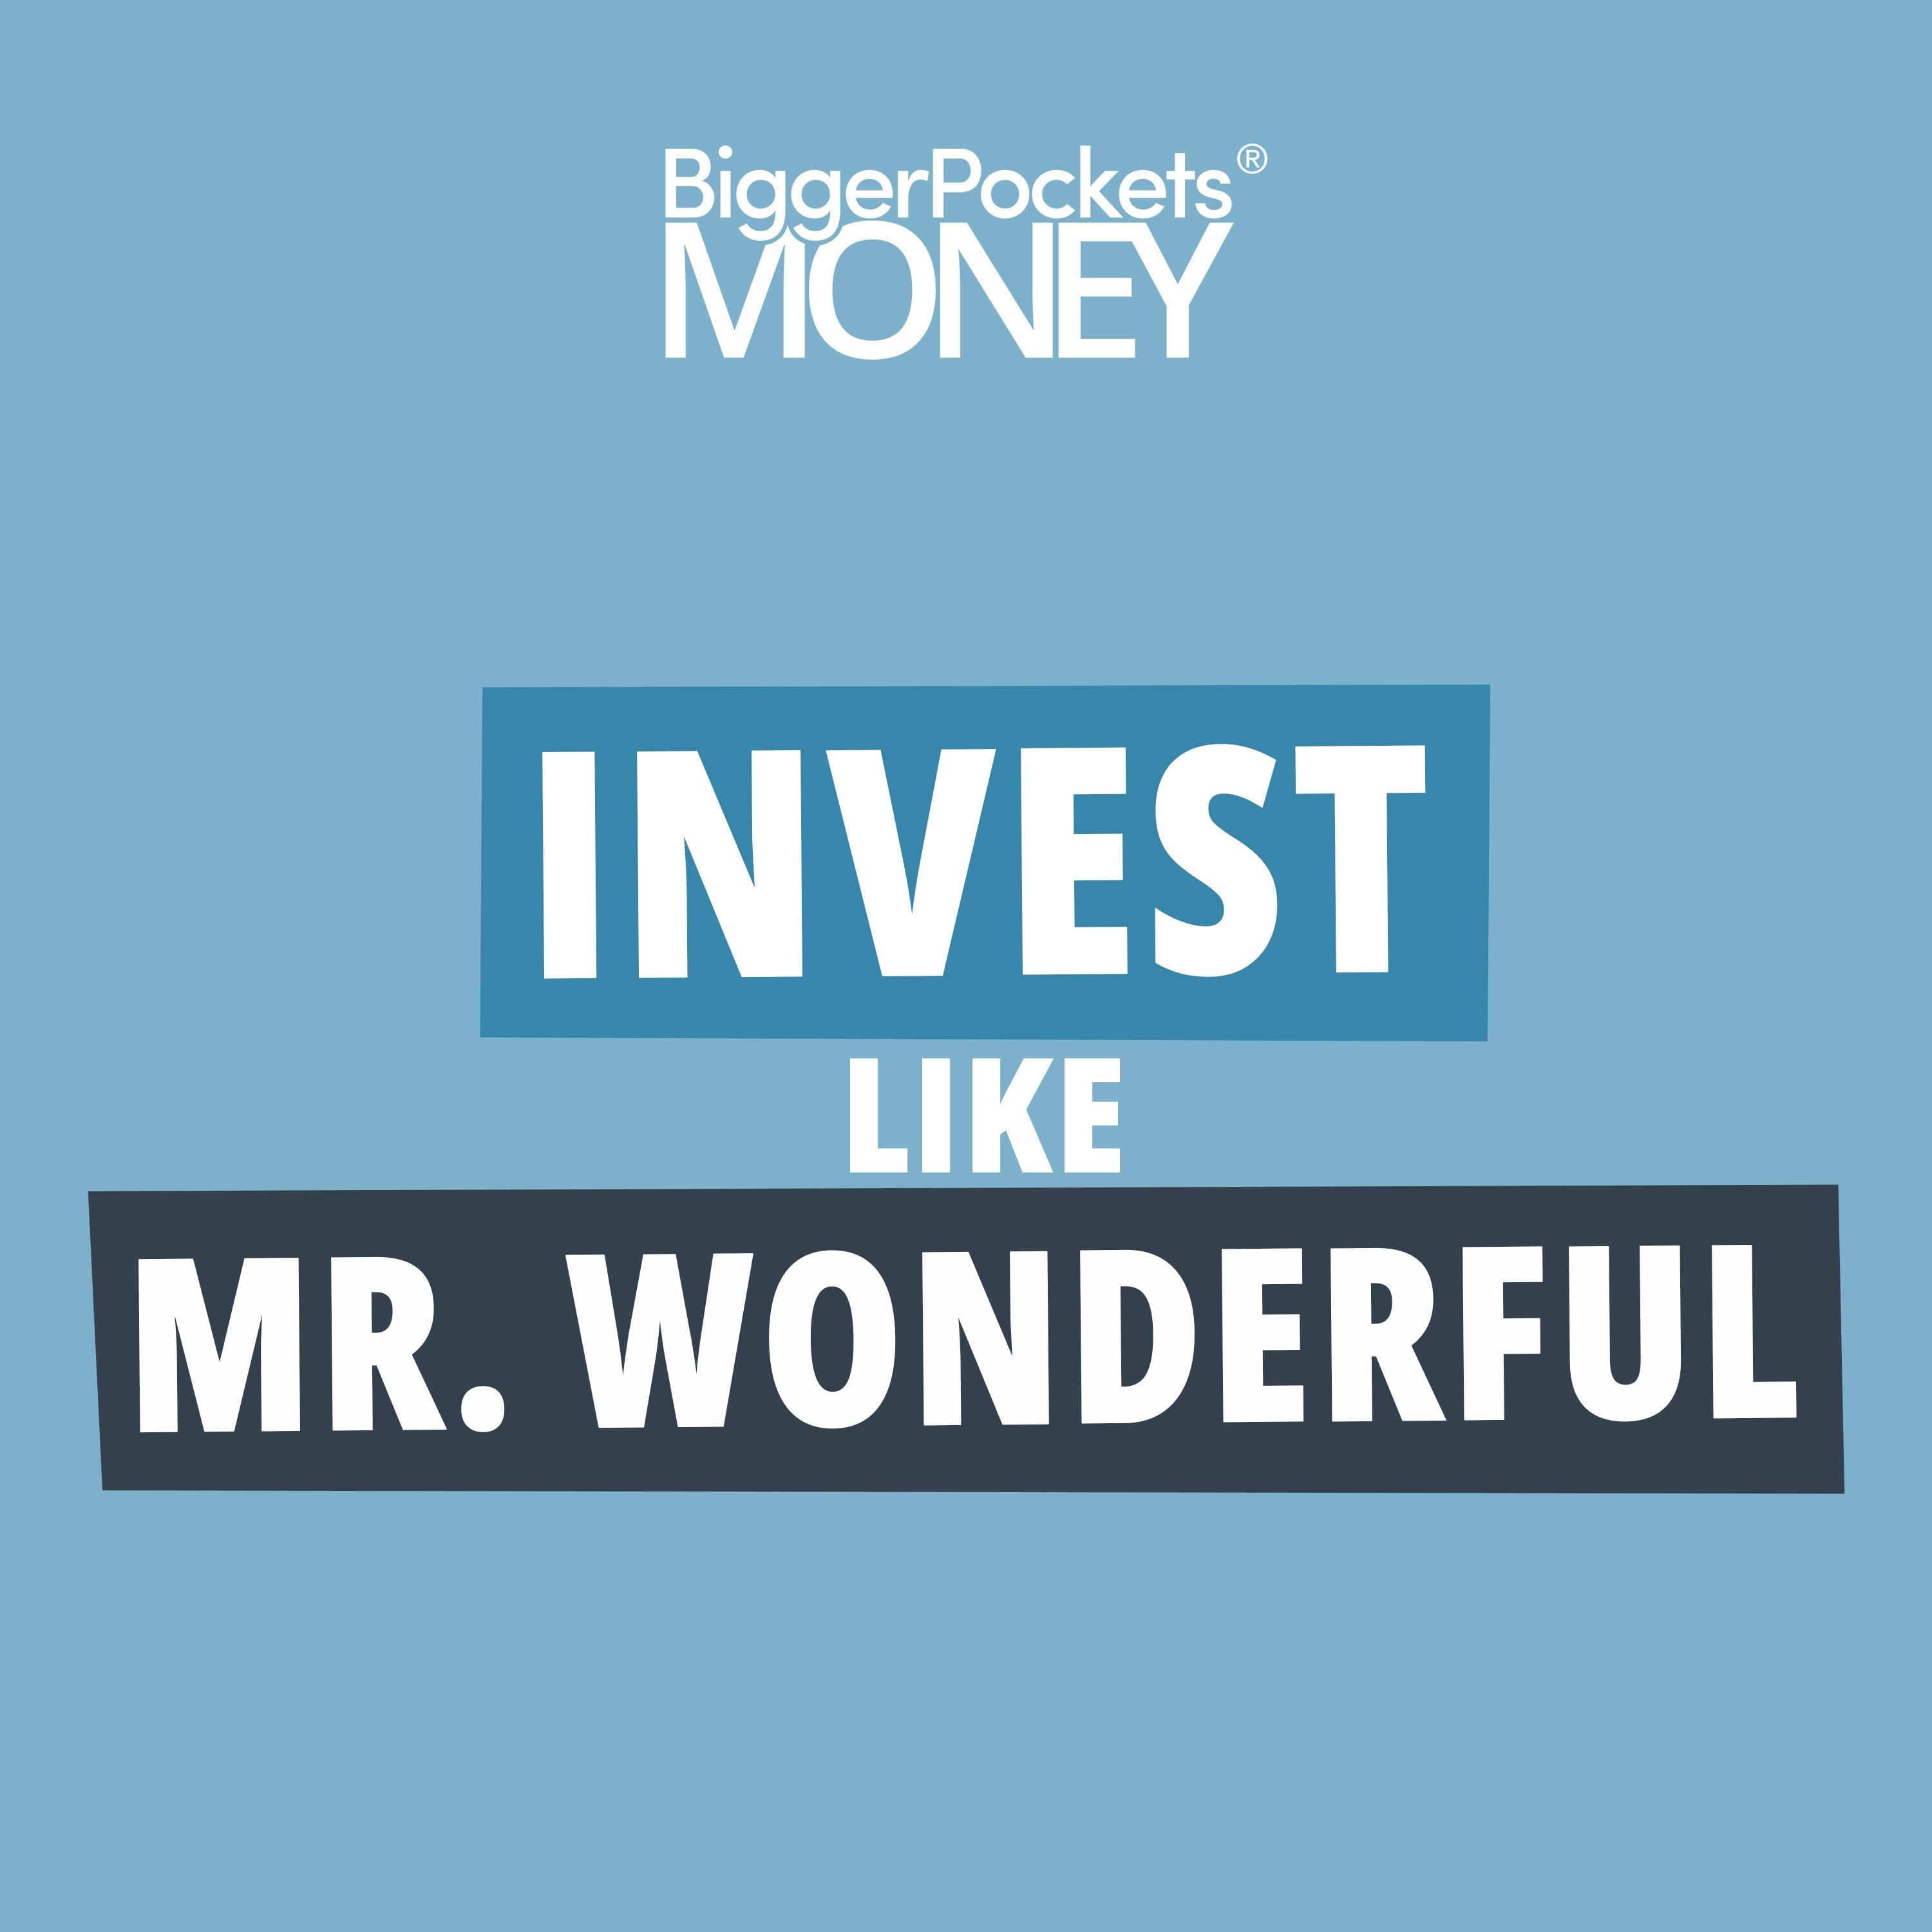 392: Kevin O'Leary: Ultimate Investing Advice from Mr. Wonderful